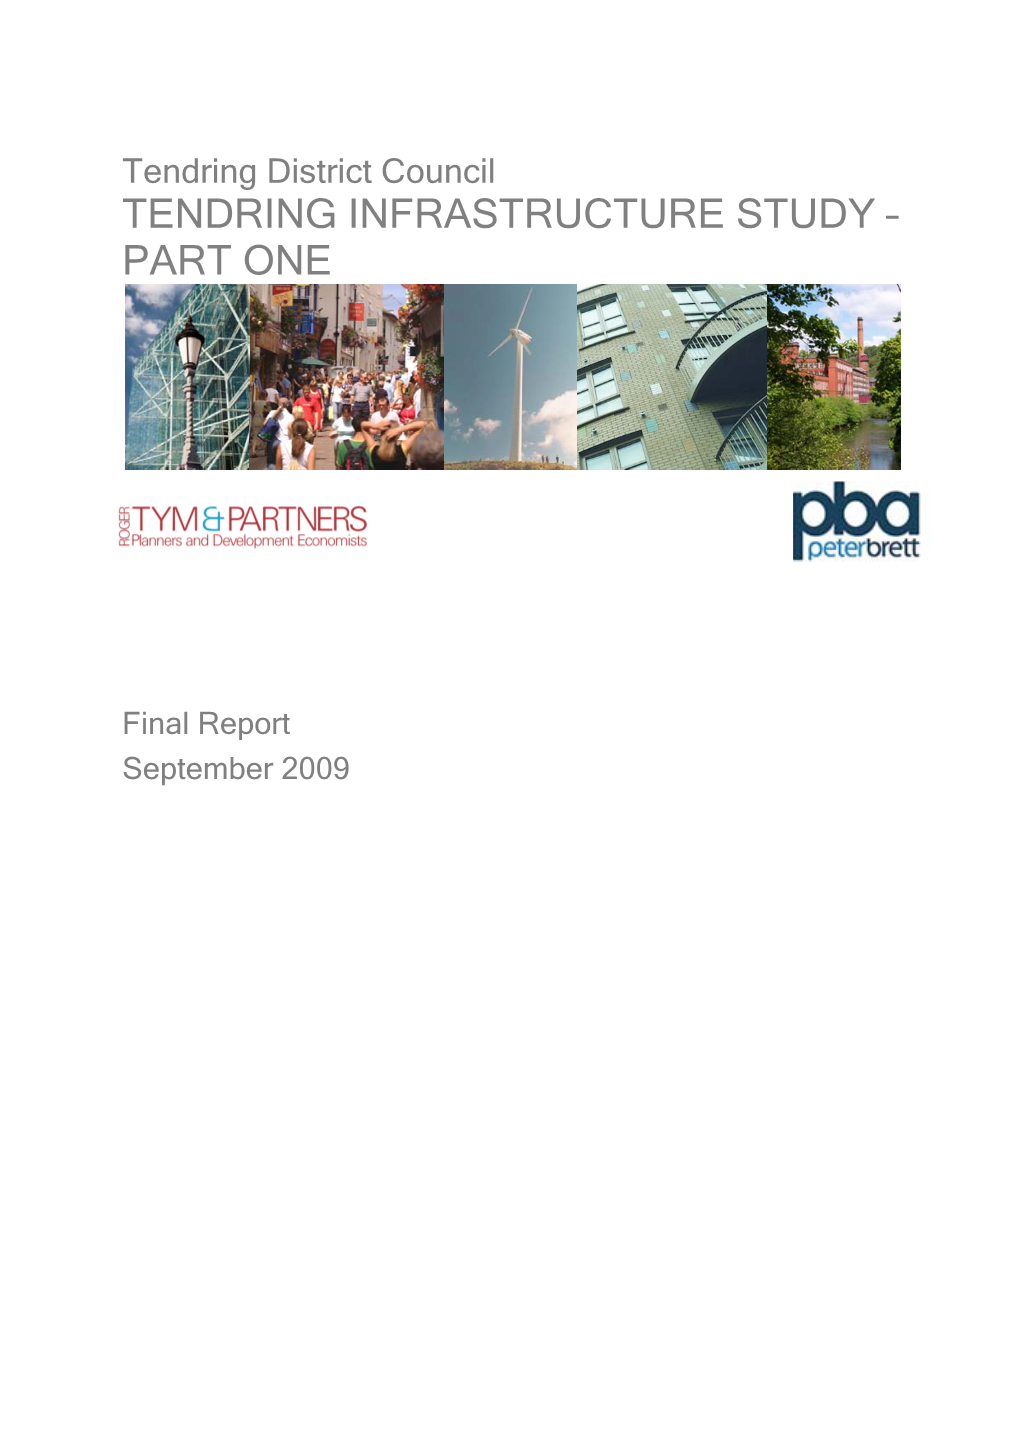 Tendring Infrastructure Study – Part One